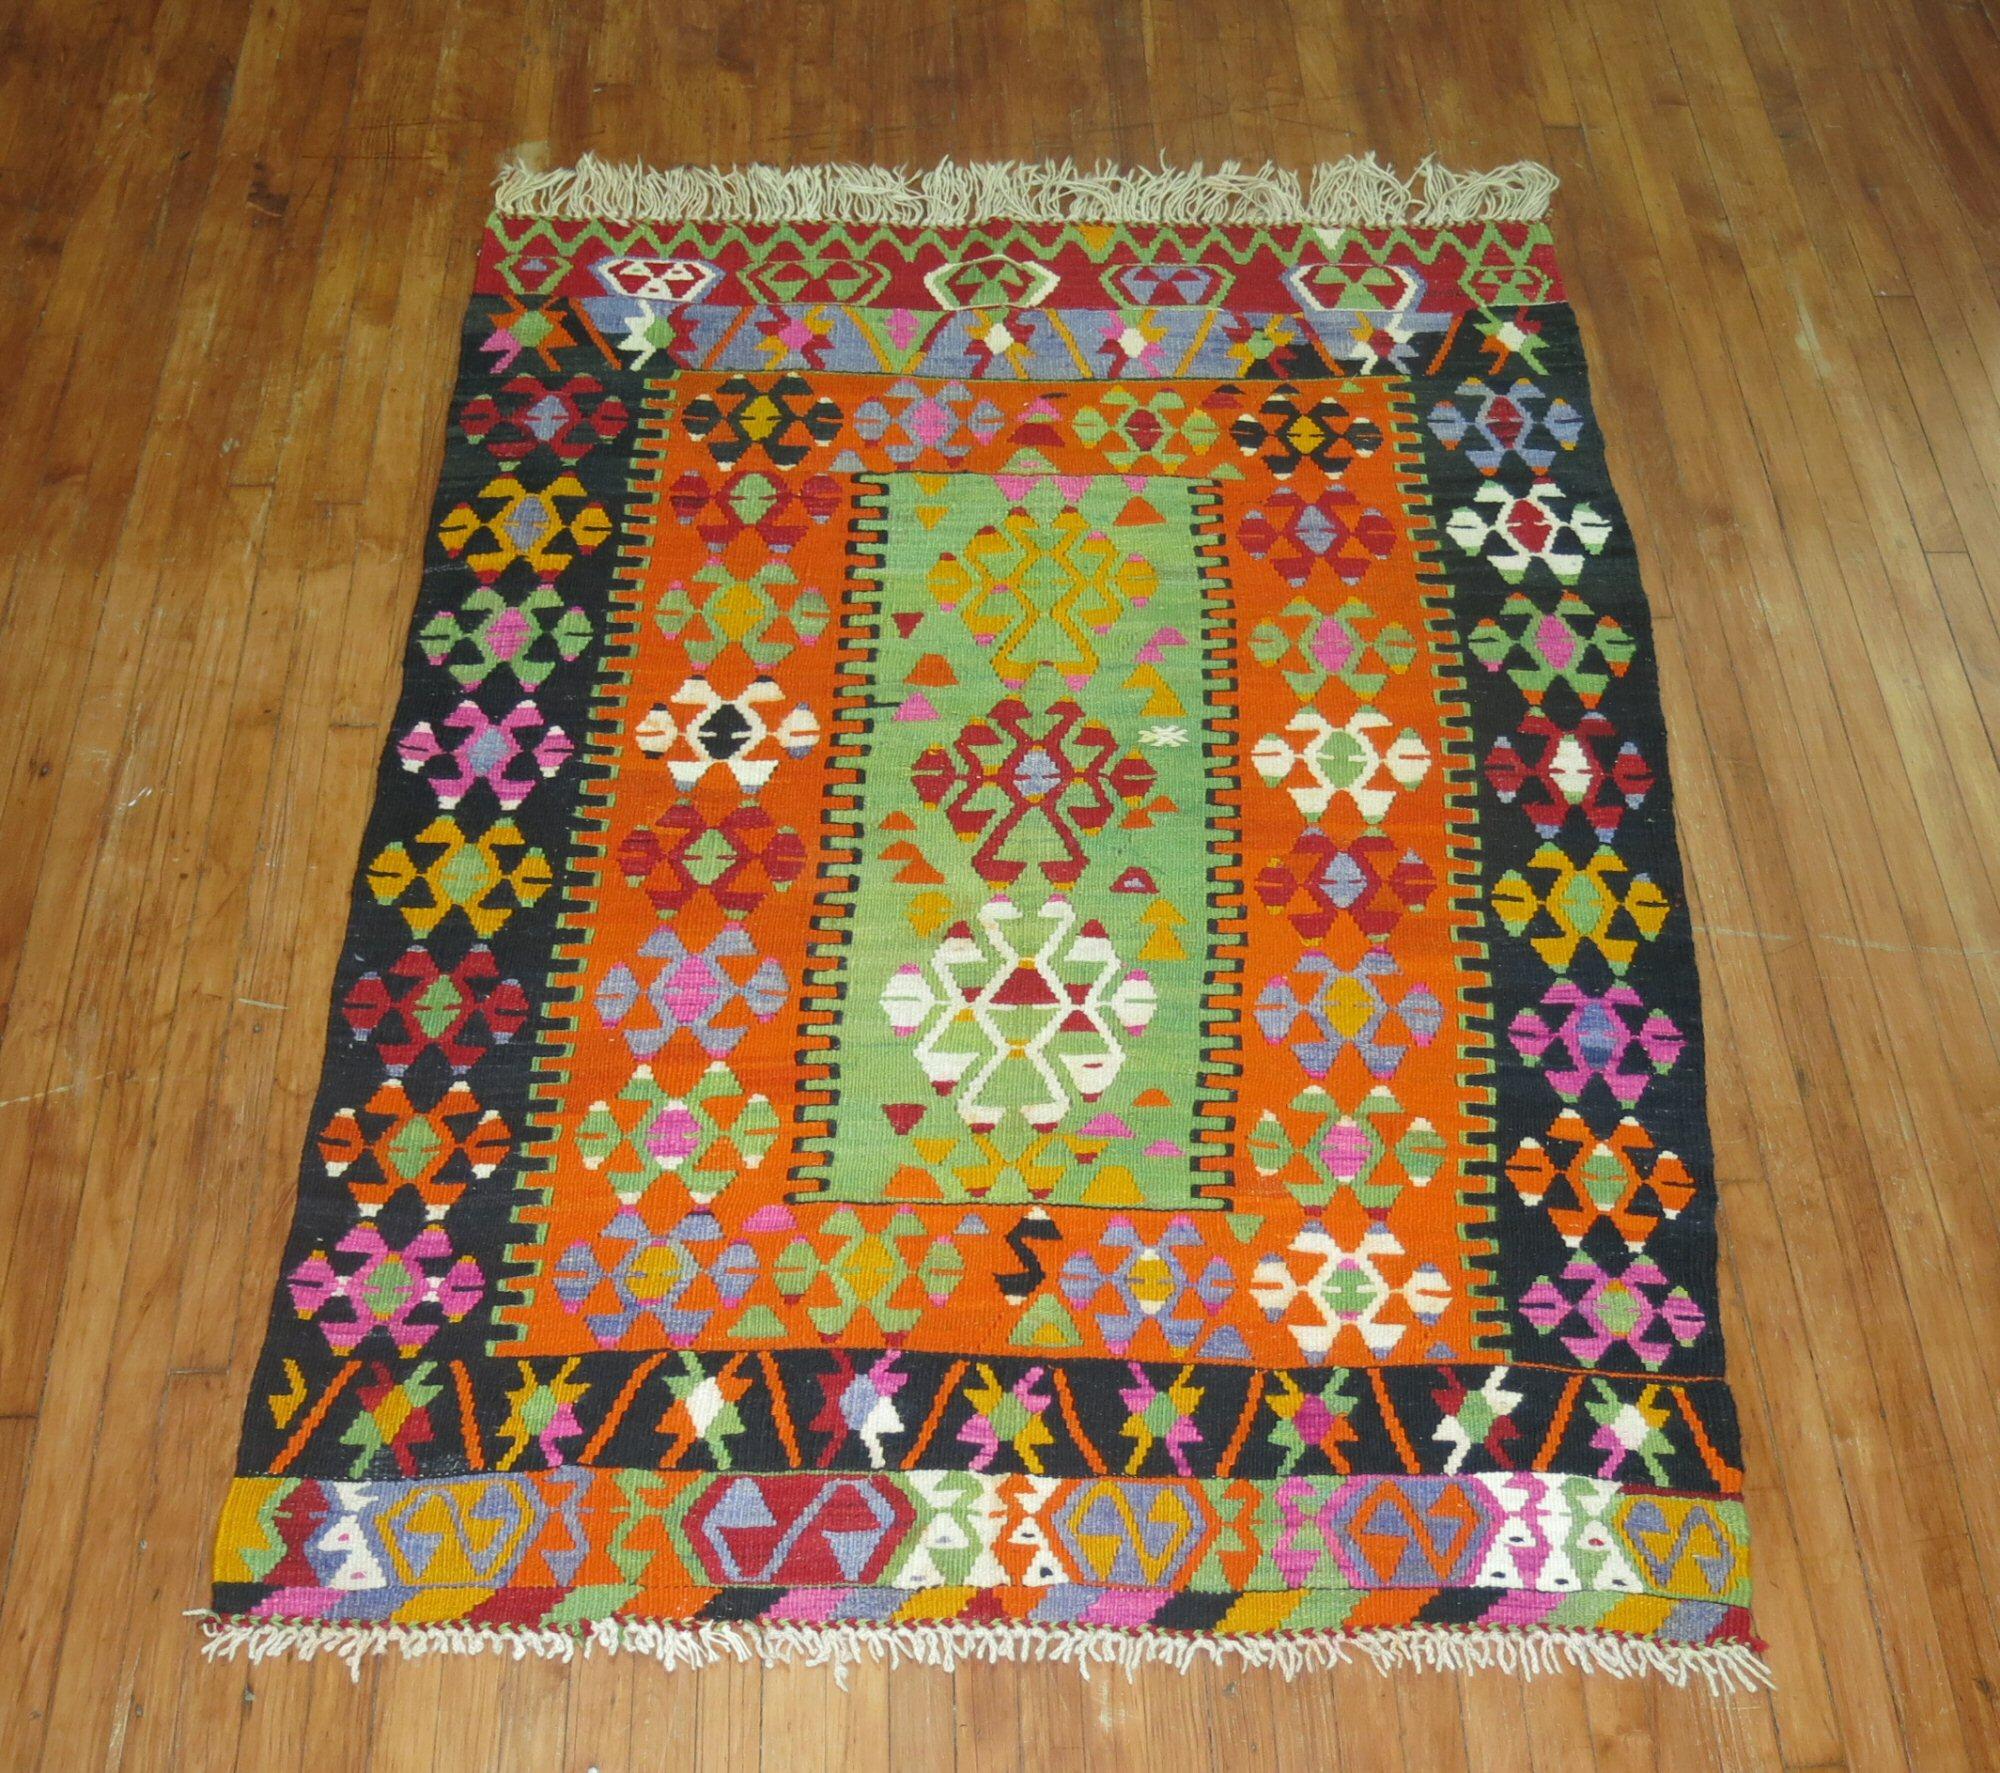 Colorful vintage Turkish Kilim flat-weave from the mid-20th century. Orange and bright green are the dominant colors on this beauty.

Measures: 5' x 6'10”.